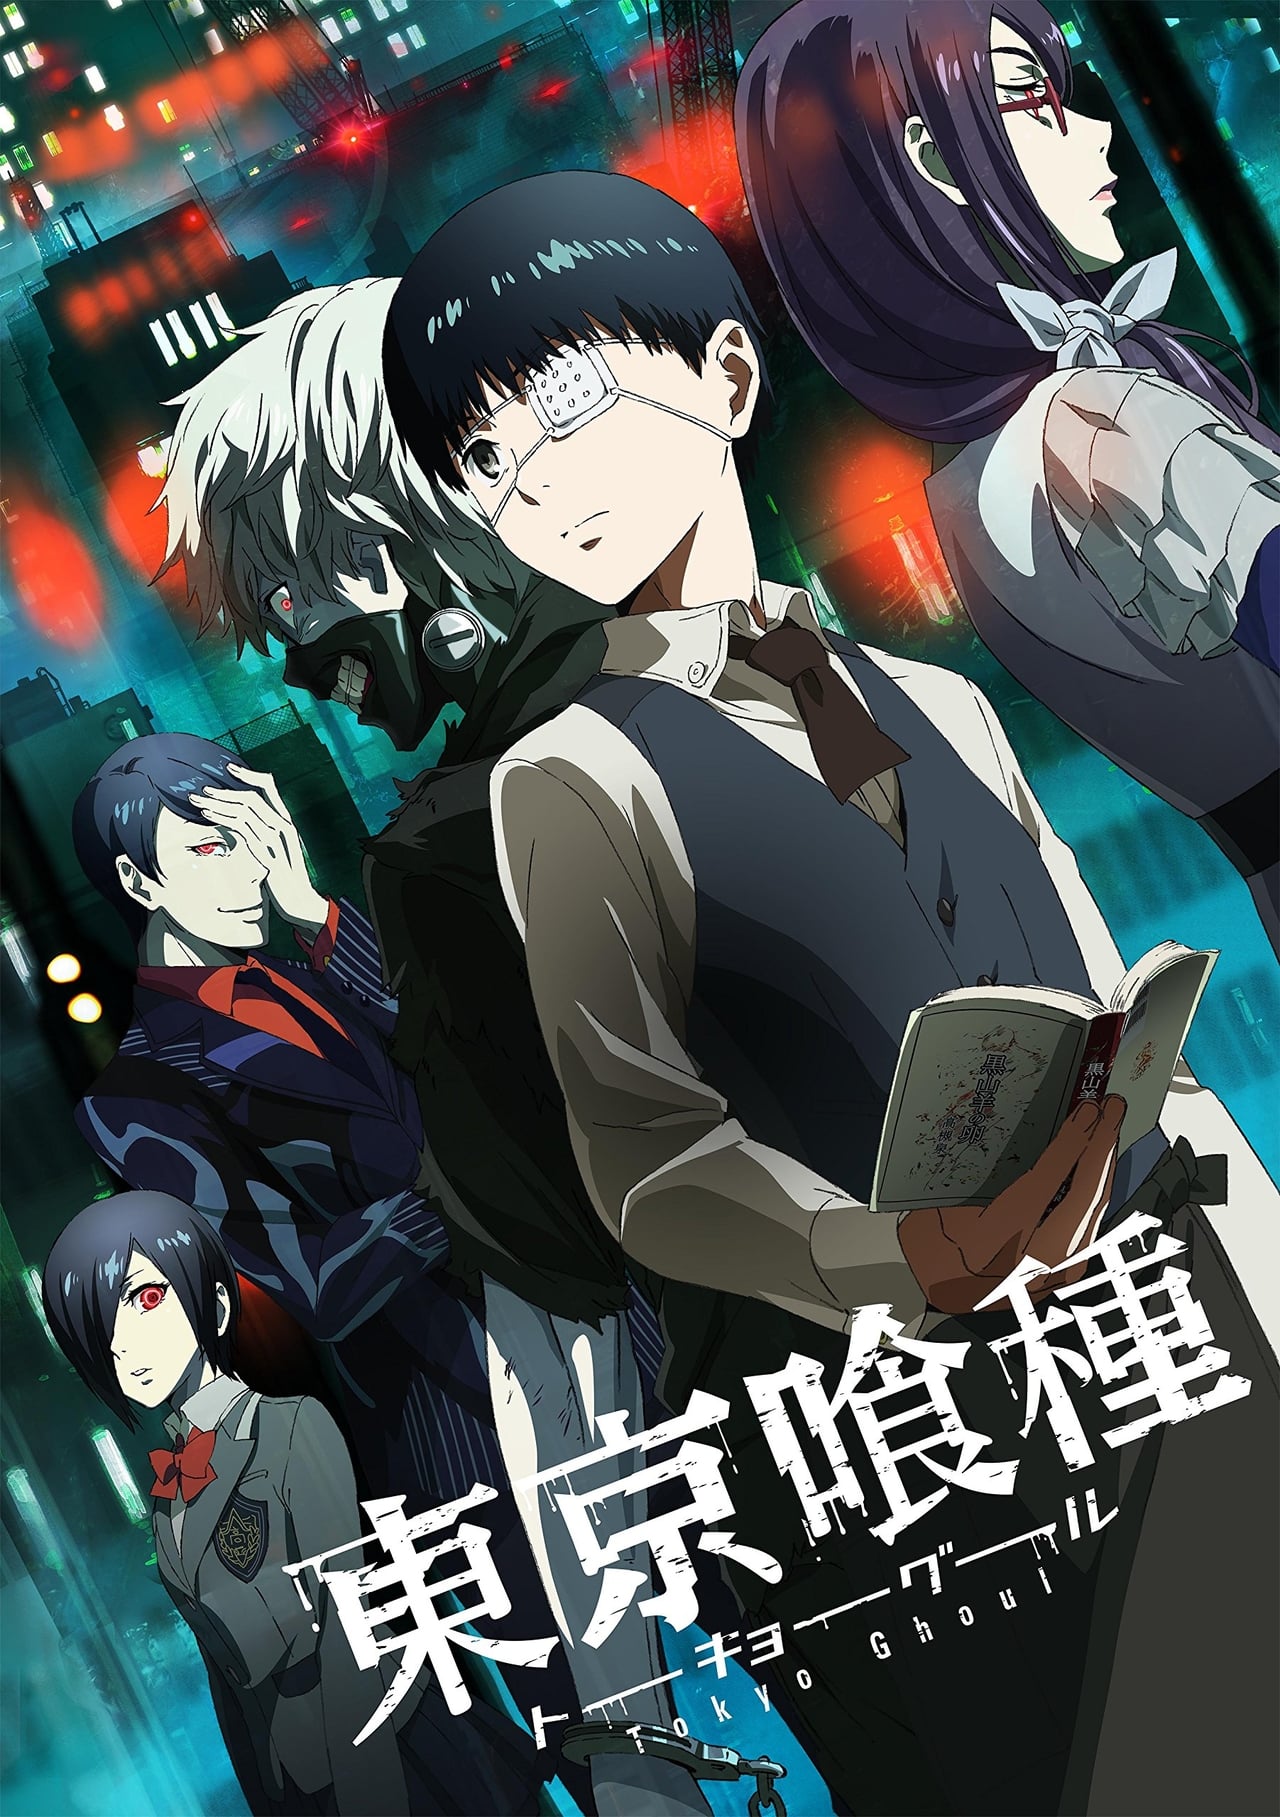 Tokyo Ghoul vA, Season 2 release date, trailers, cast, synopsis and reviews